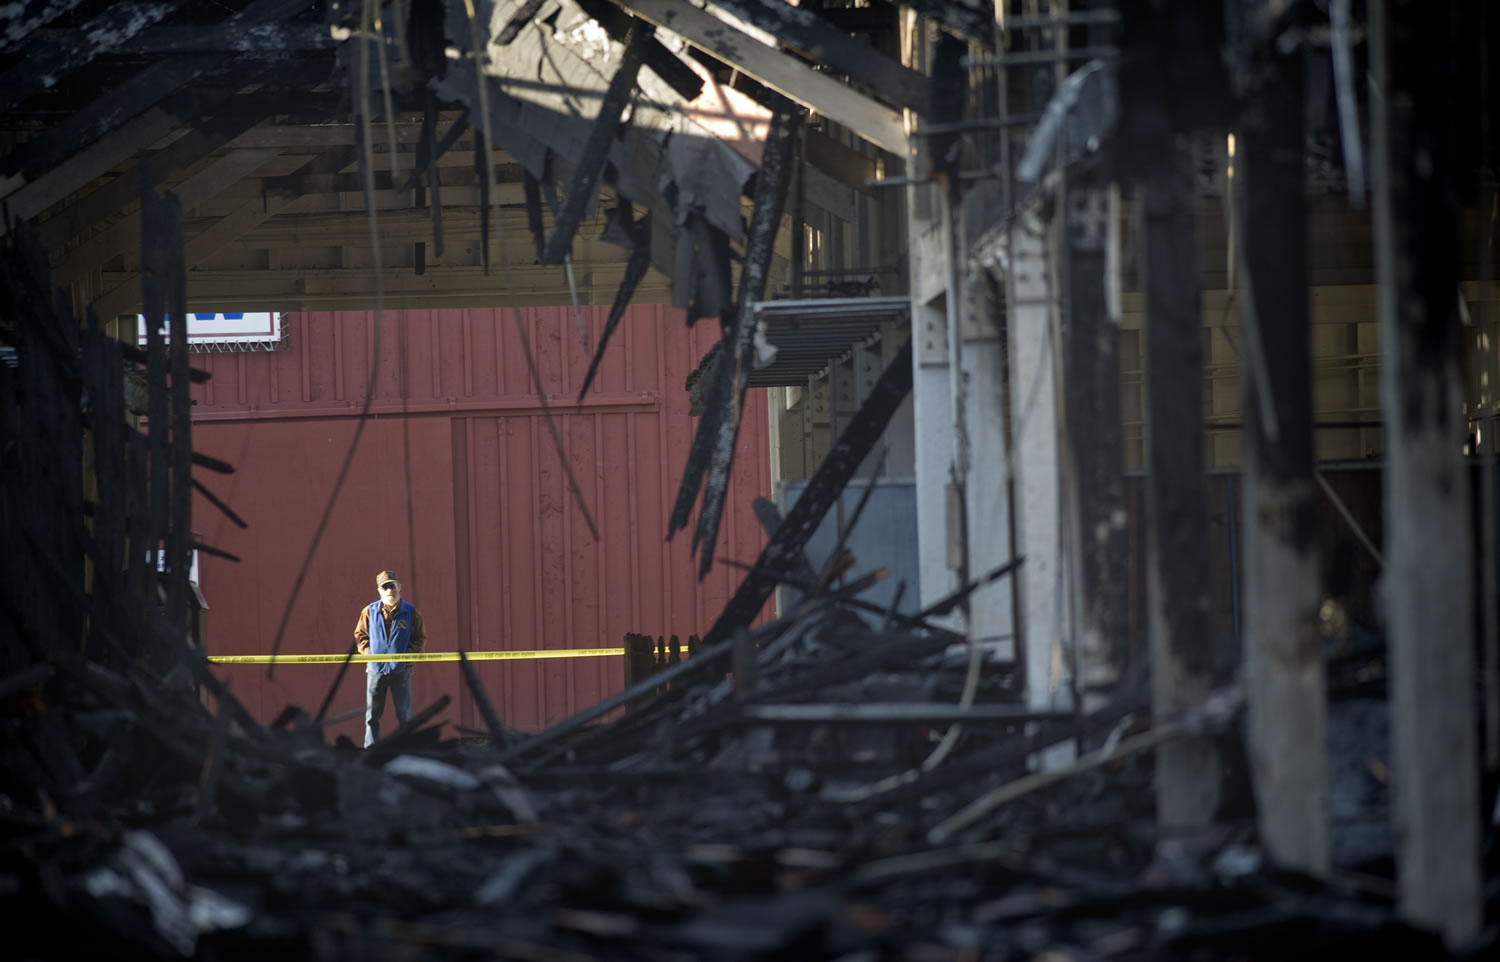 An unidentified man looks at the damage to the Evergreen Hall at the Washington State Fairgrounds in Puyallup on Monday.